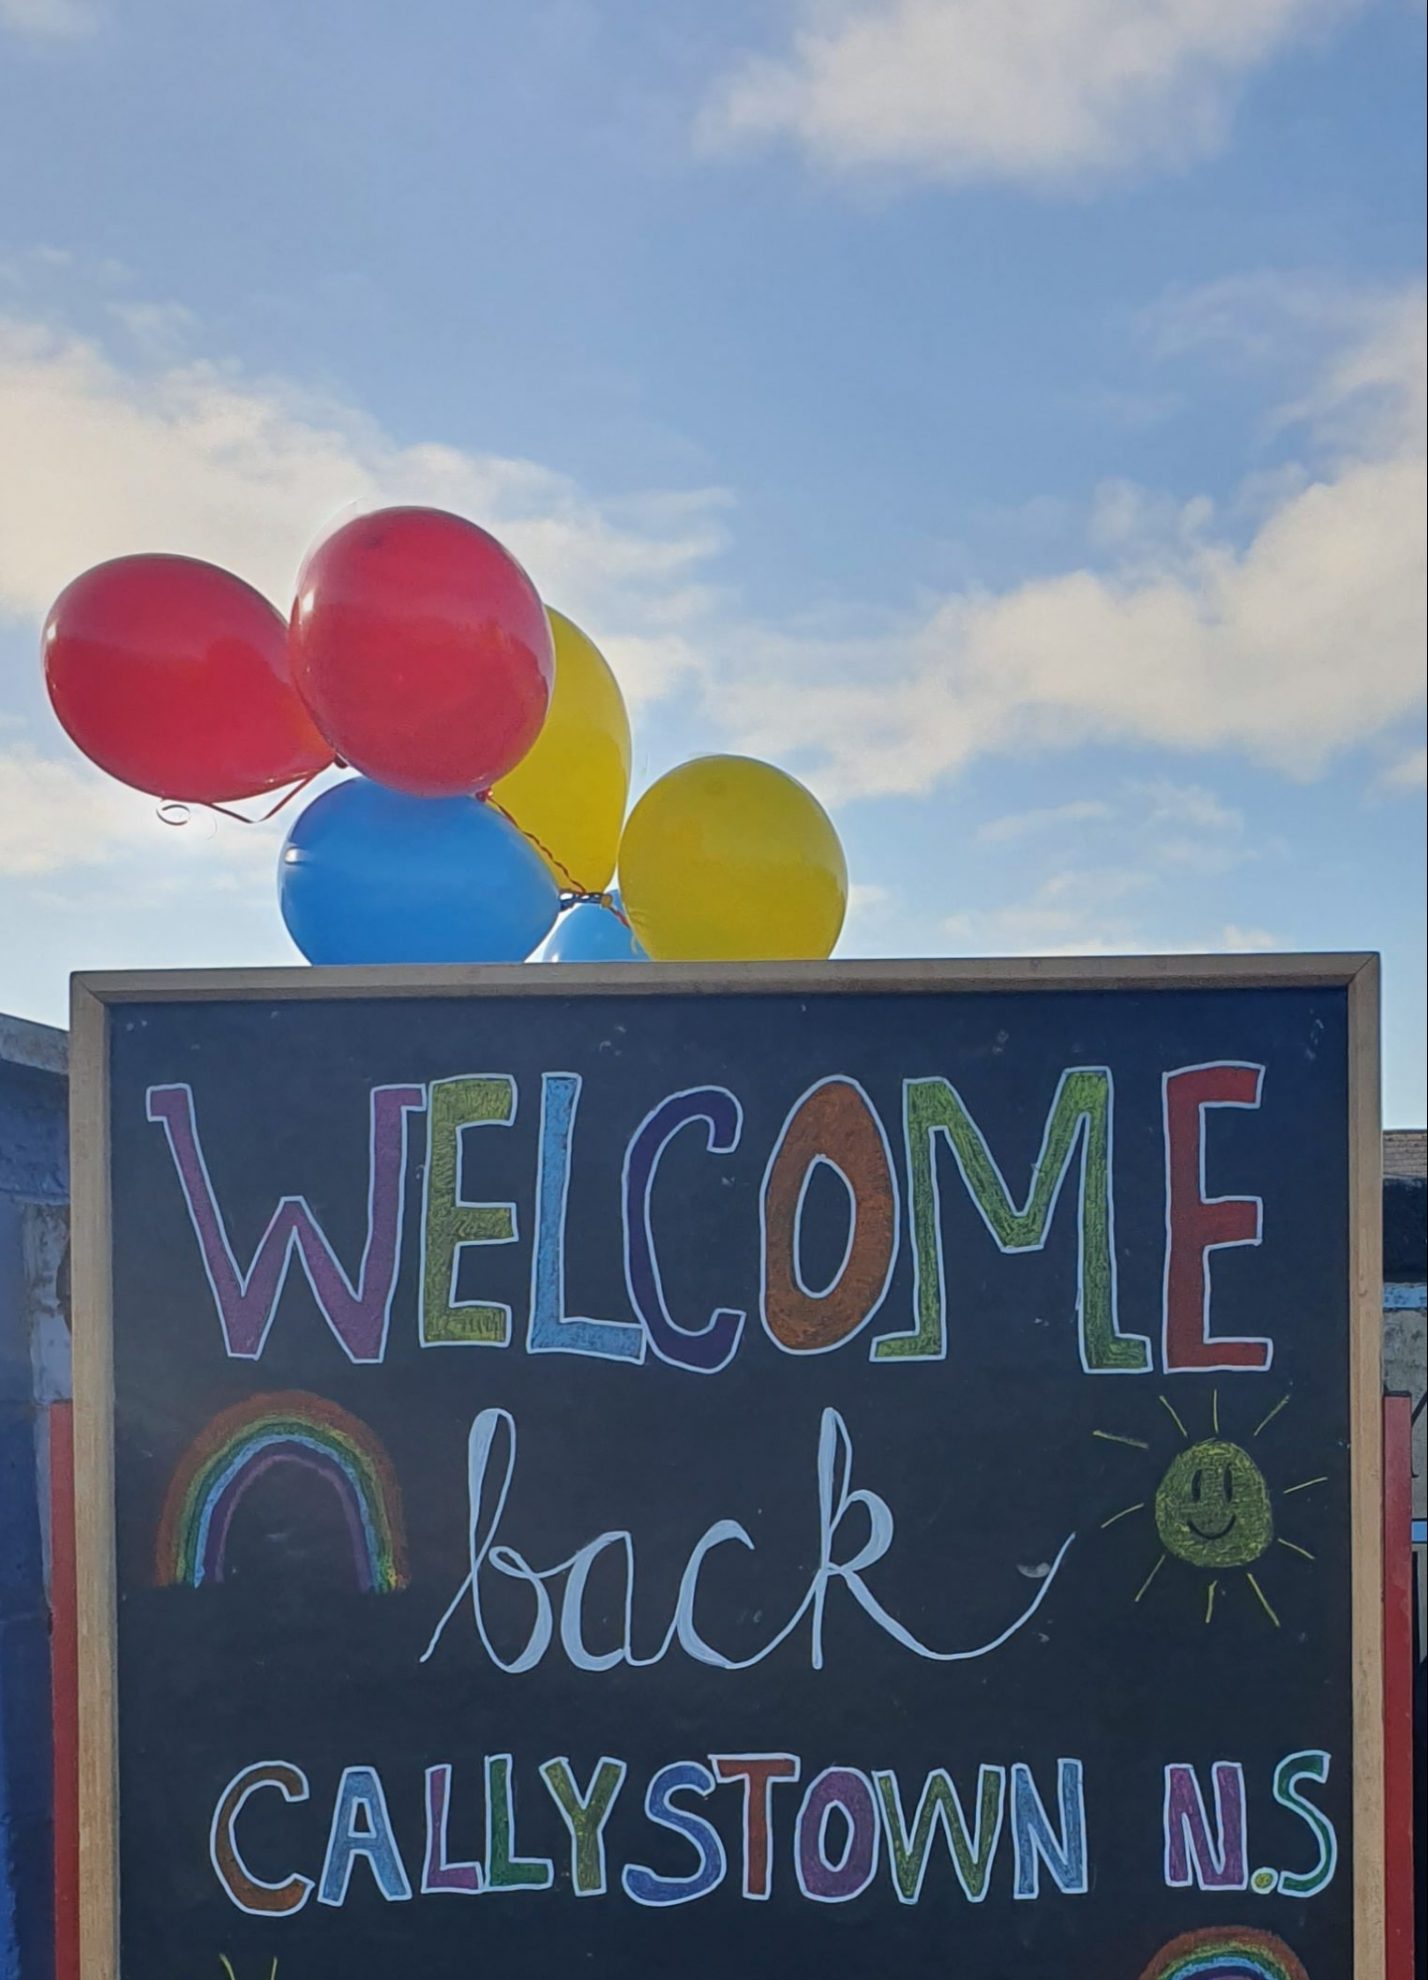 Back to School 2021- Tuesday August 31st